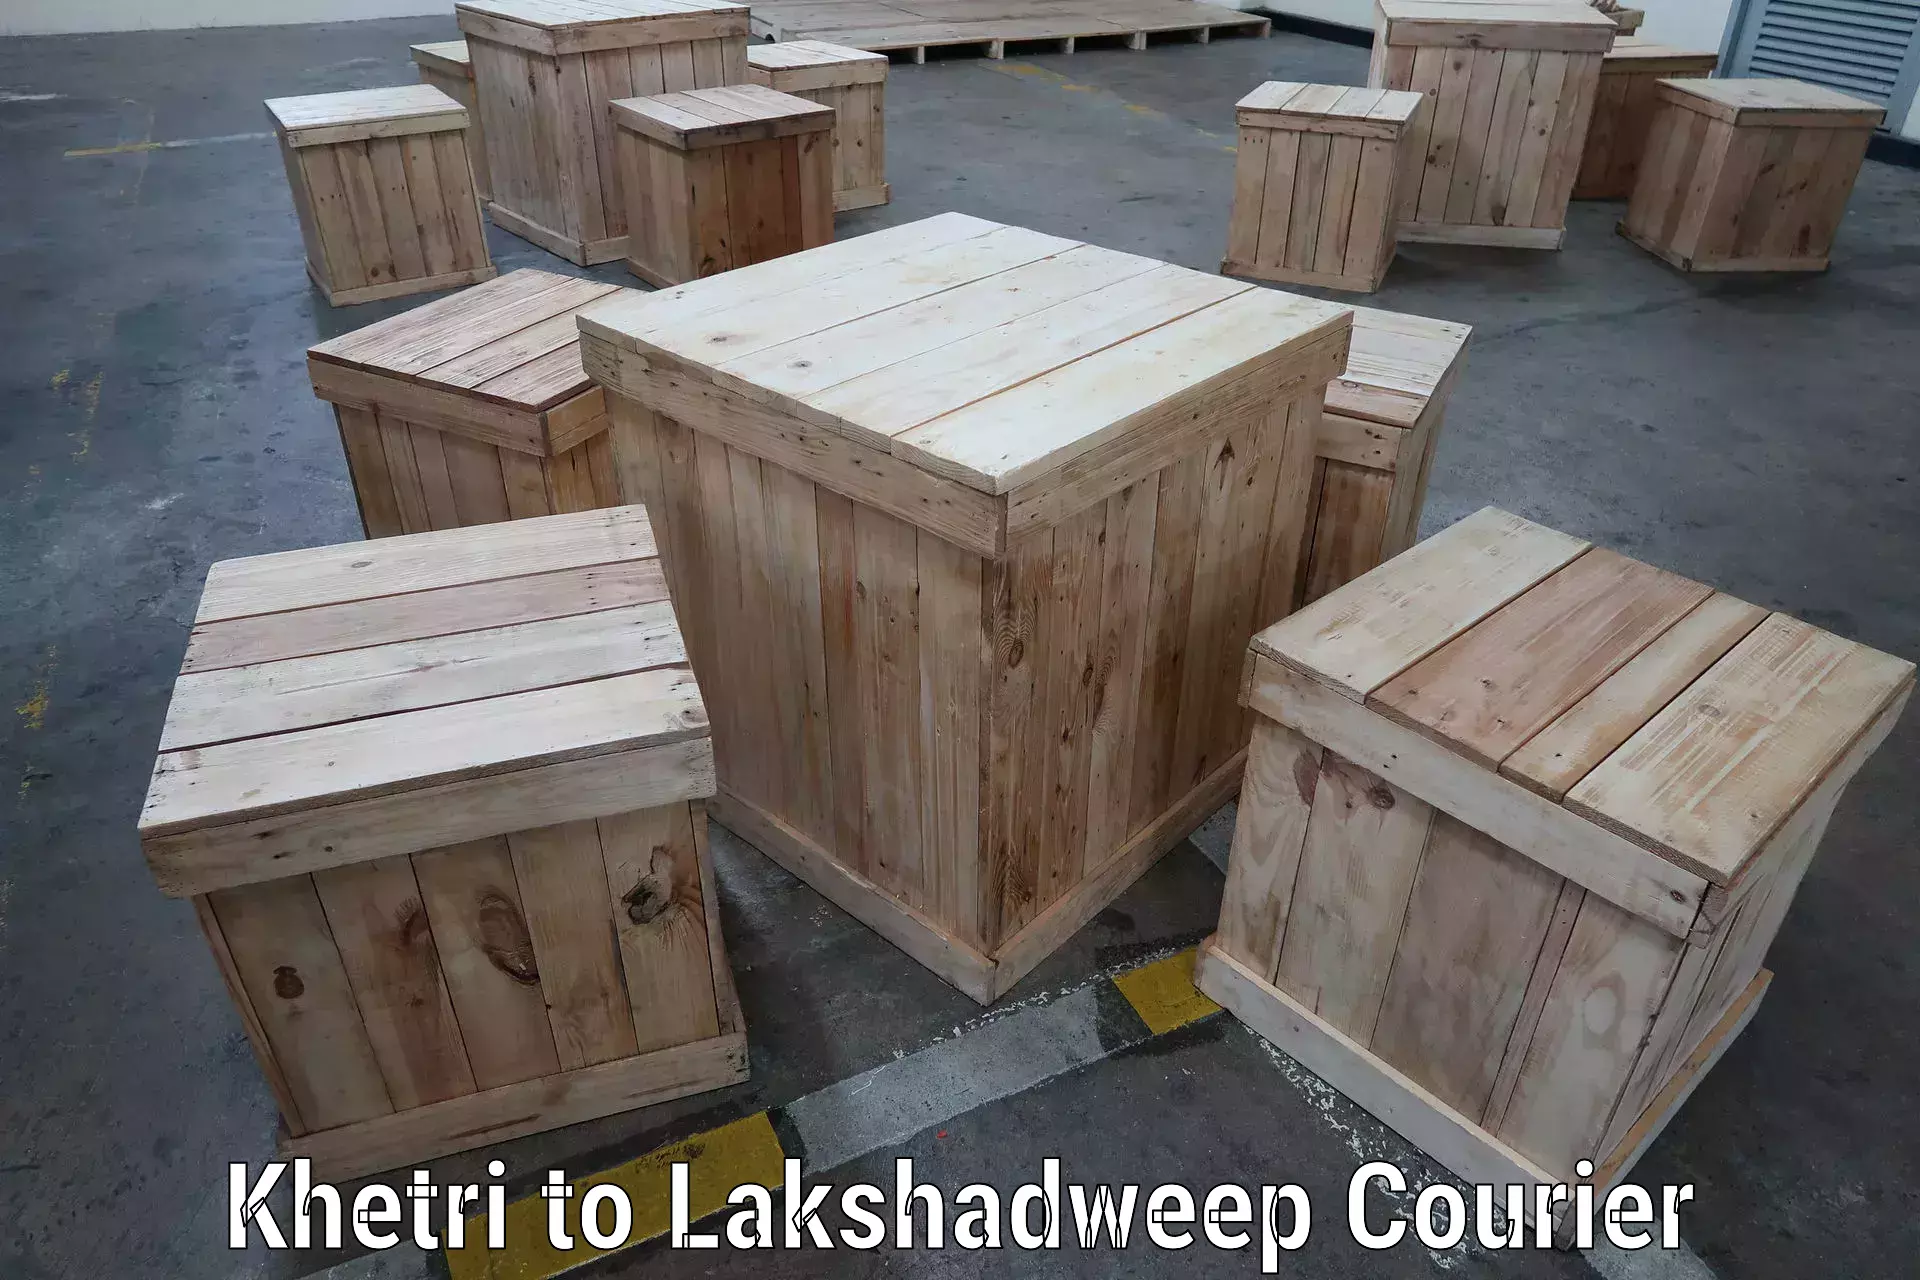 High-capacity parcel service in Khetri to Lakshadweep